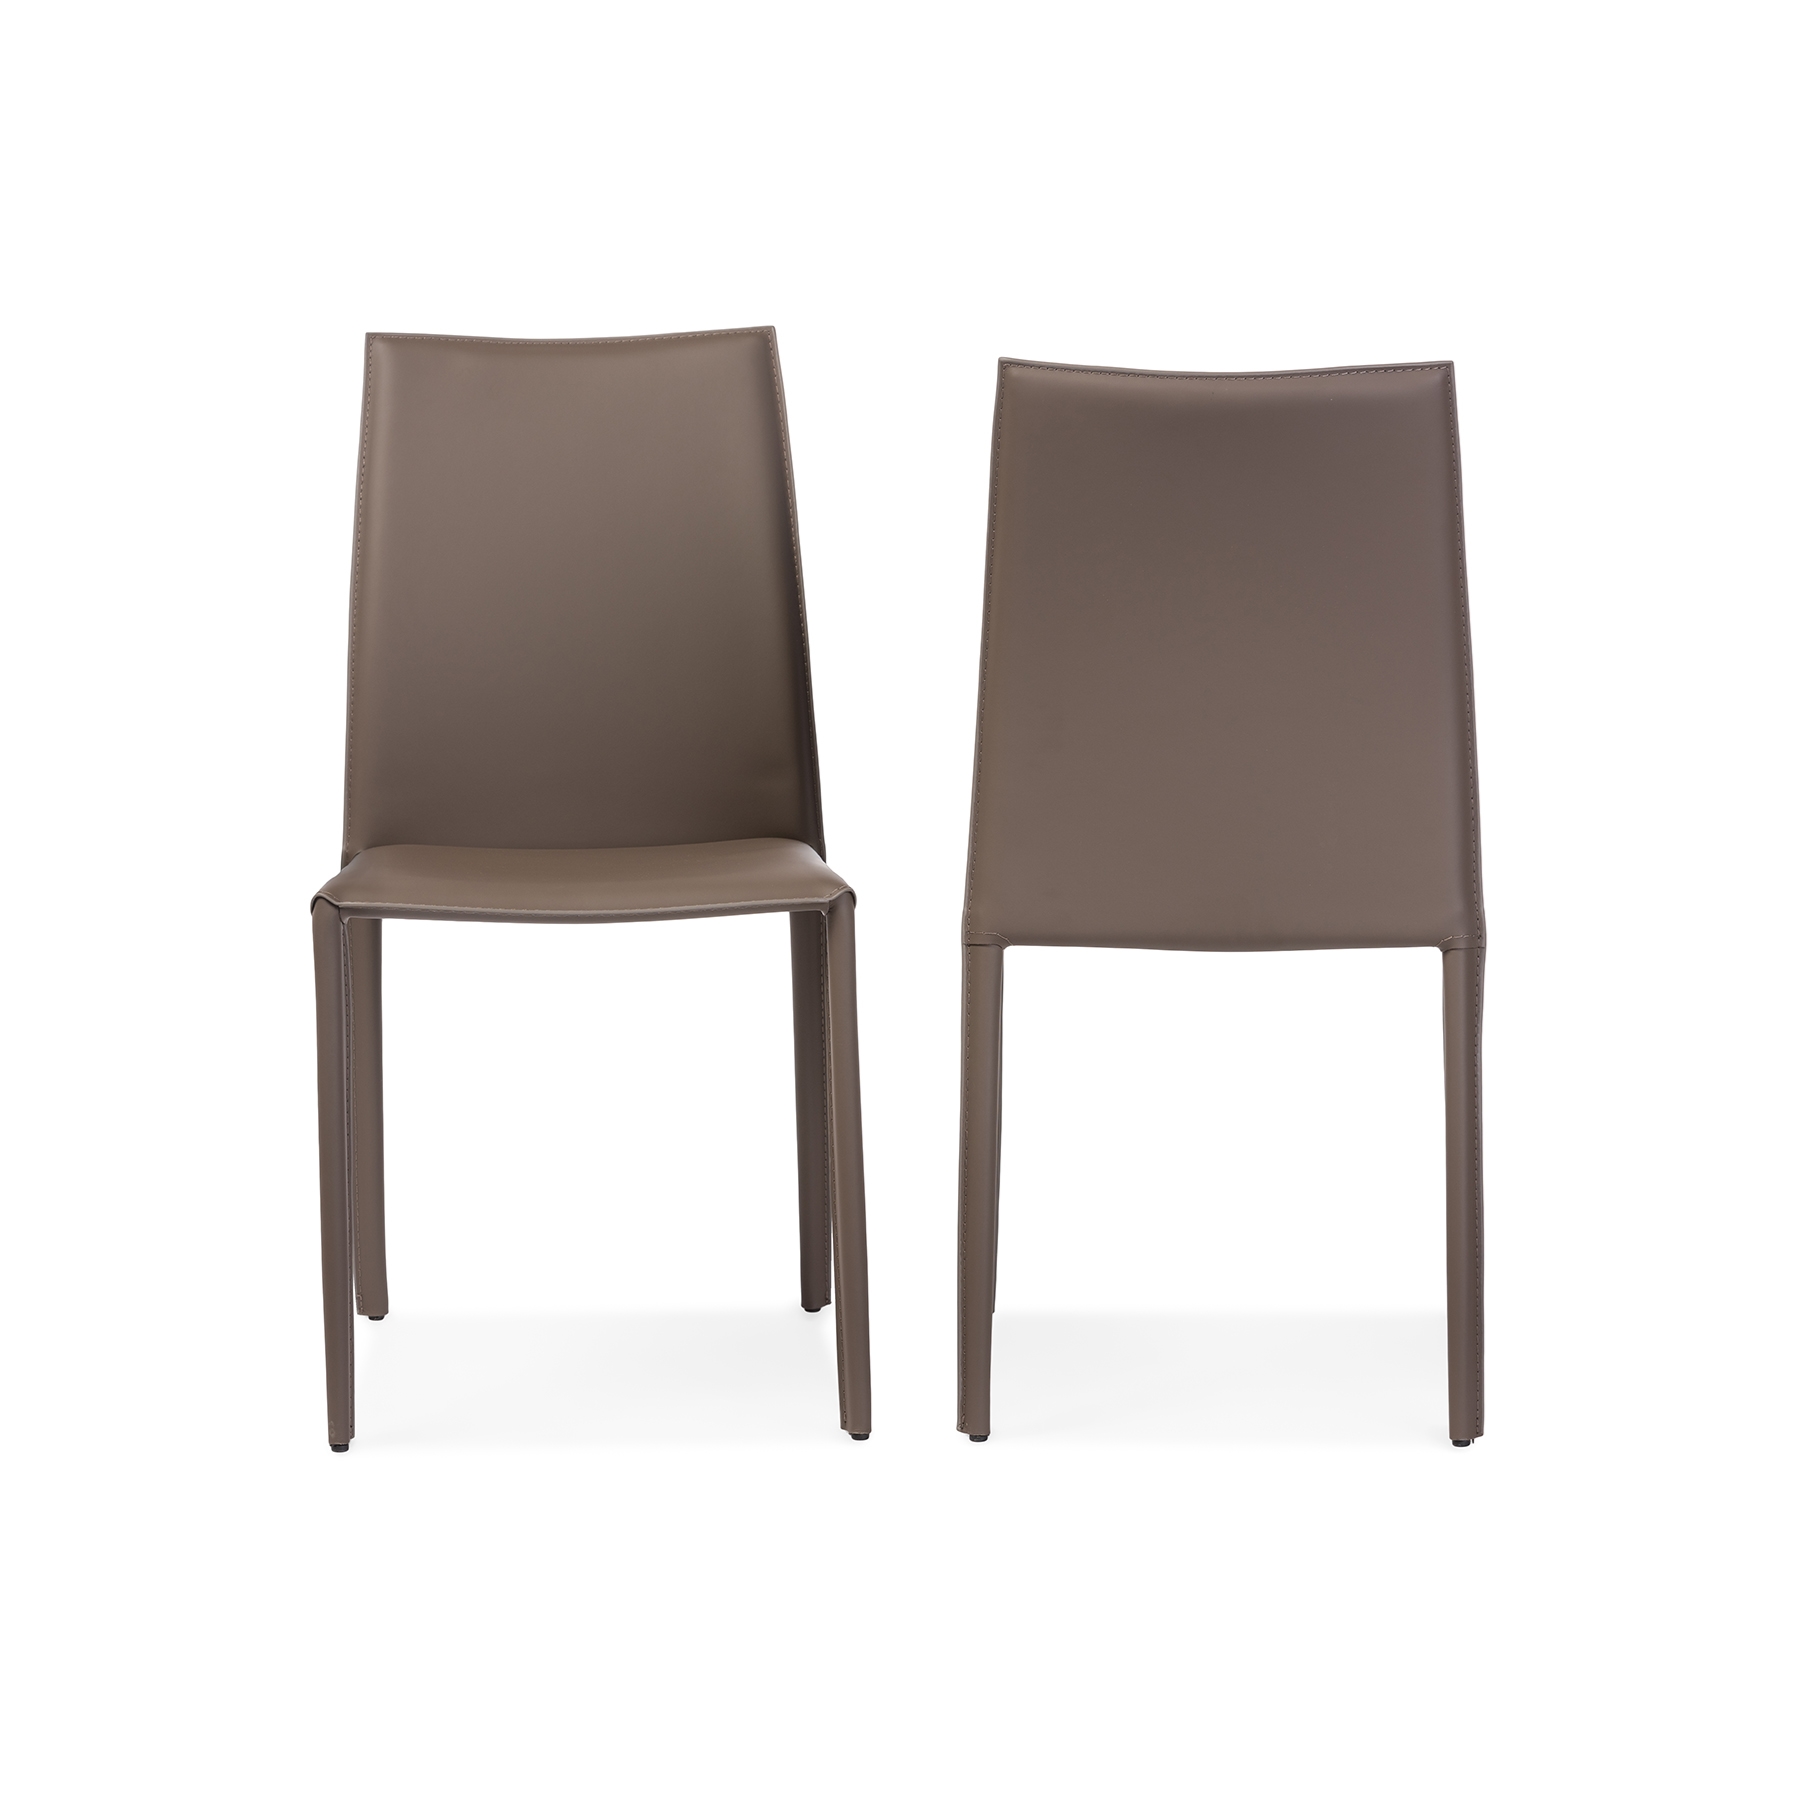 Baxton Studio Rockford Modern And, Bonded Leather Dining Chairs